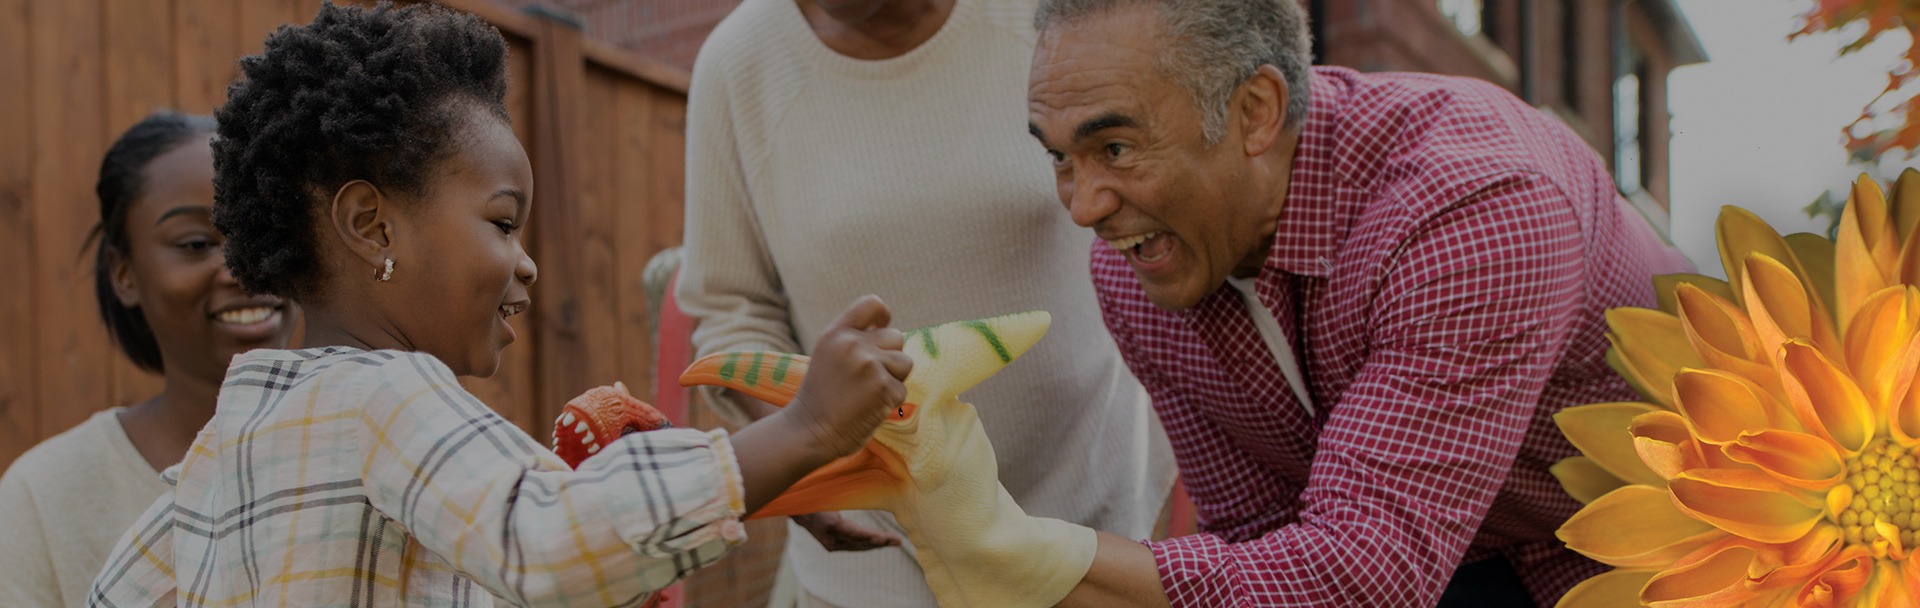 older man smiling and playing with toys with a child